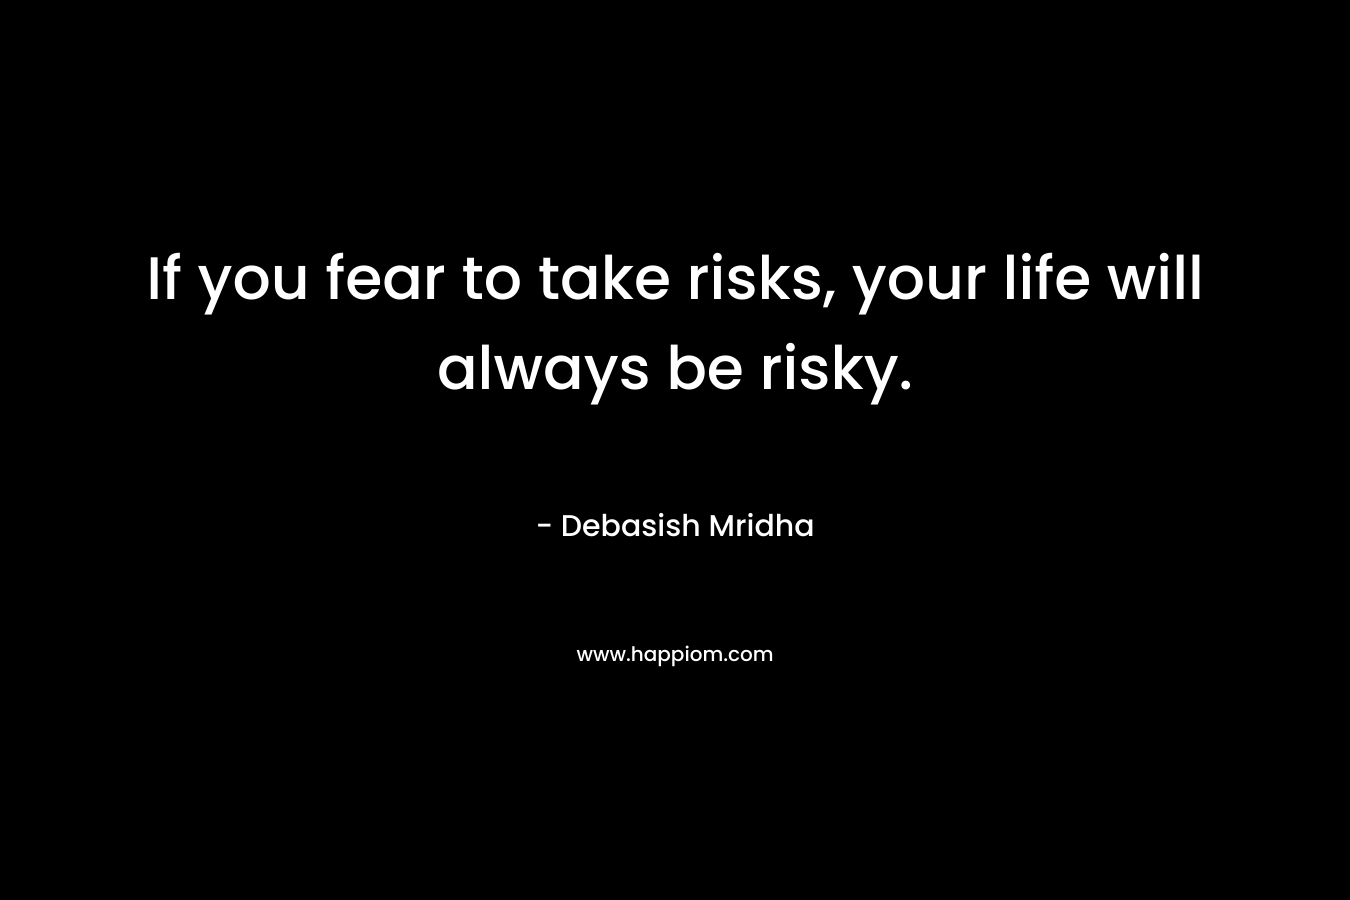 If you fear to take risks, your life will always be risky.